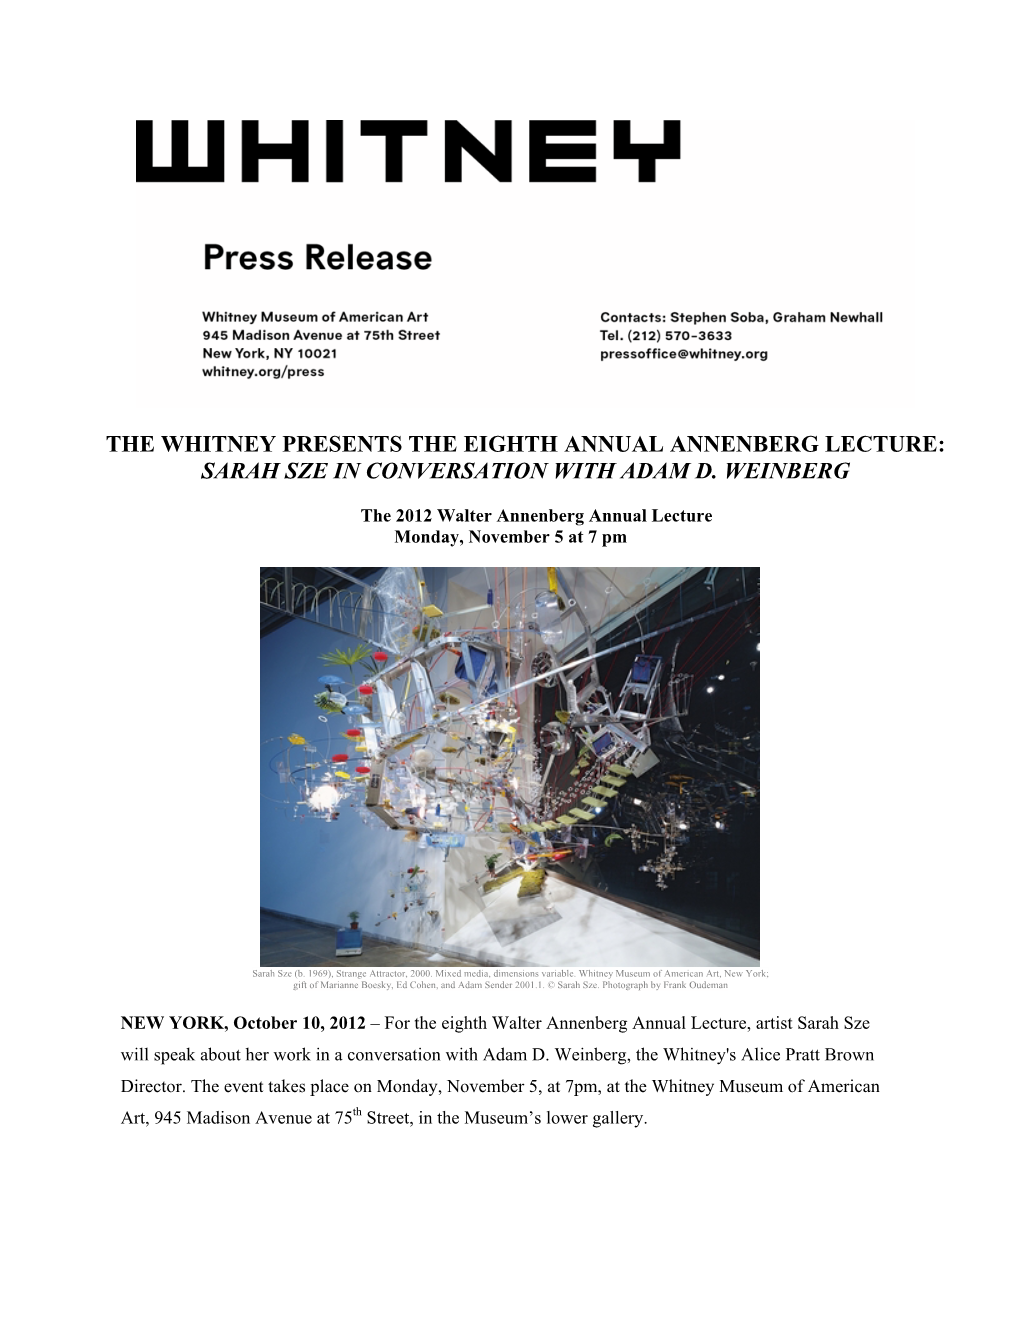 The Whitney Presents the Eighth Annual Annenberg Lecture: Sarah Sze in Conversation with Adam D